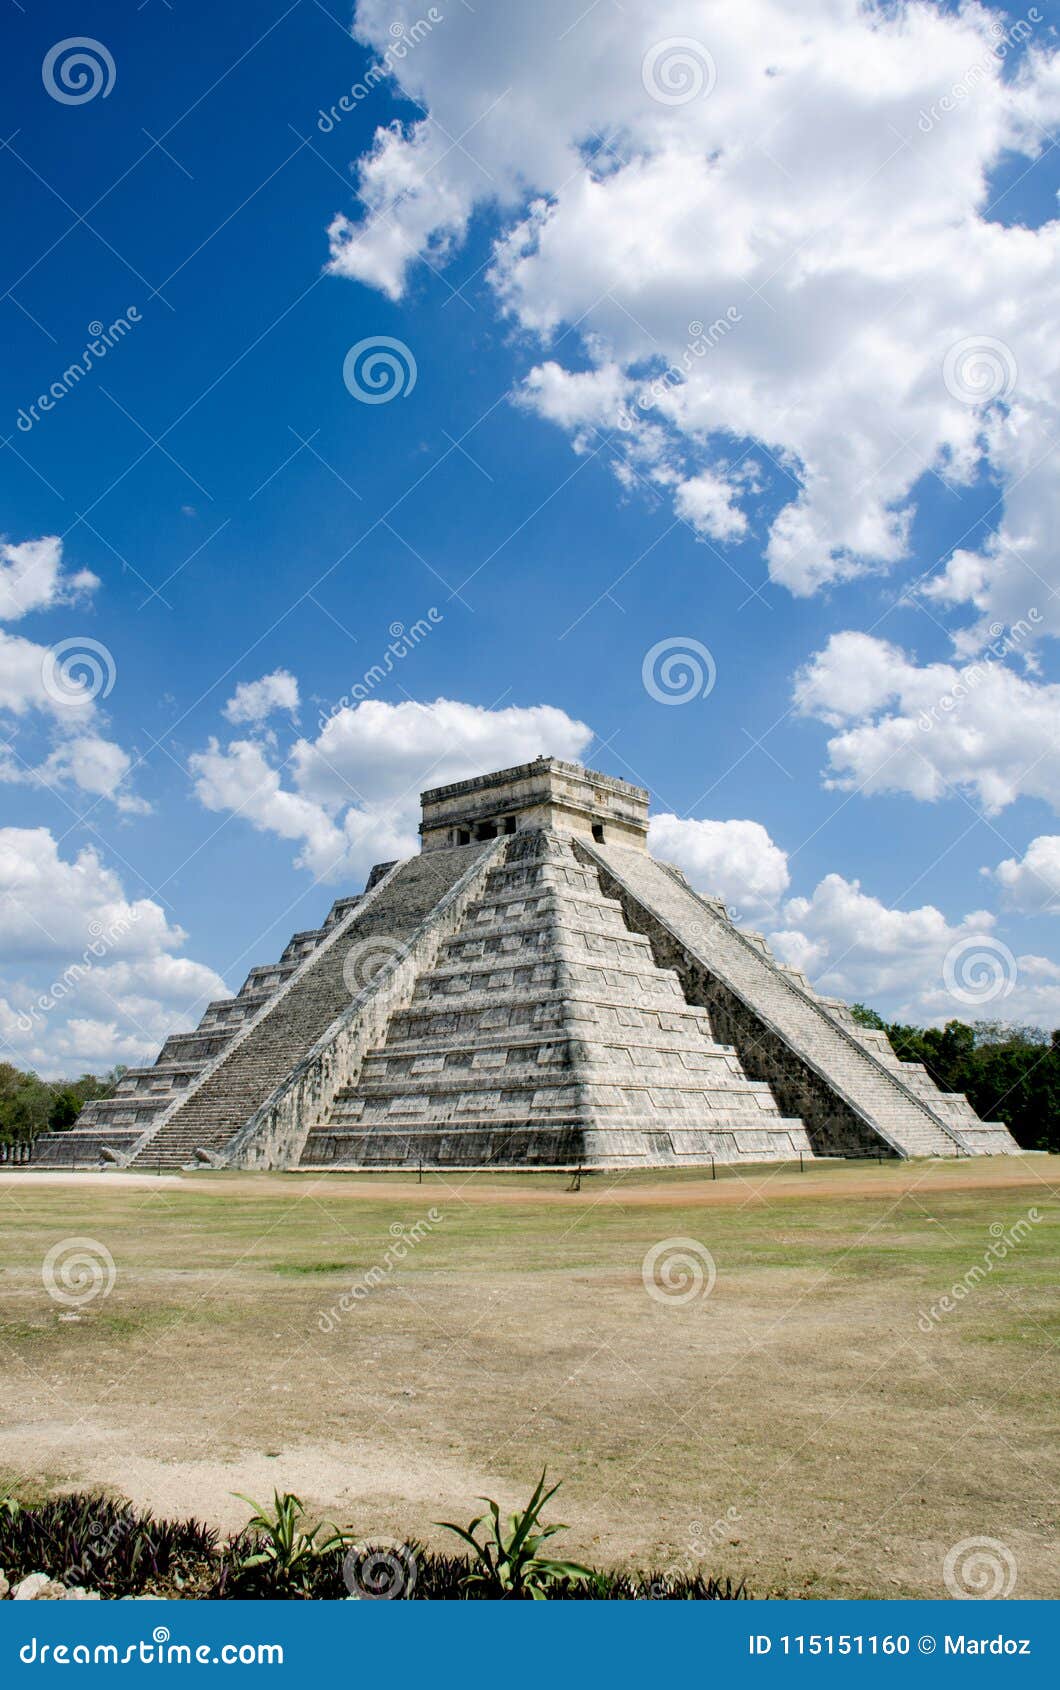 the kukulcan temple at chichen itza, wonder of the world